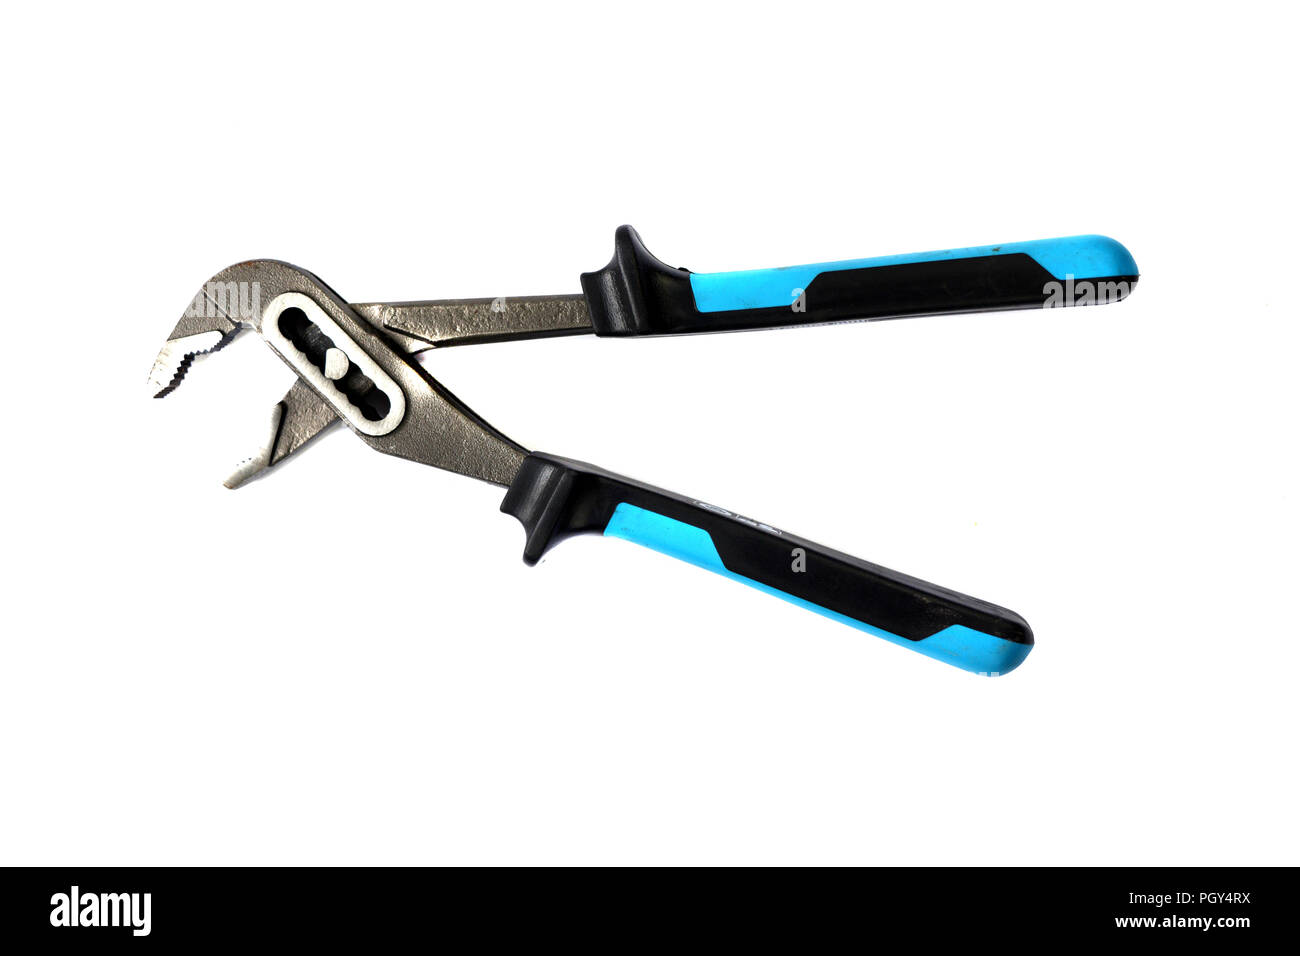 New plumber pliers pincers tool isolated on white background Stock Photo